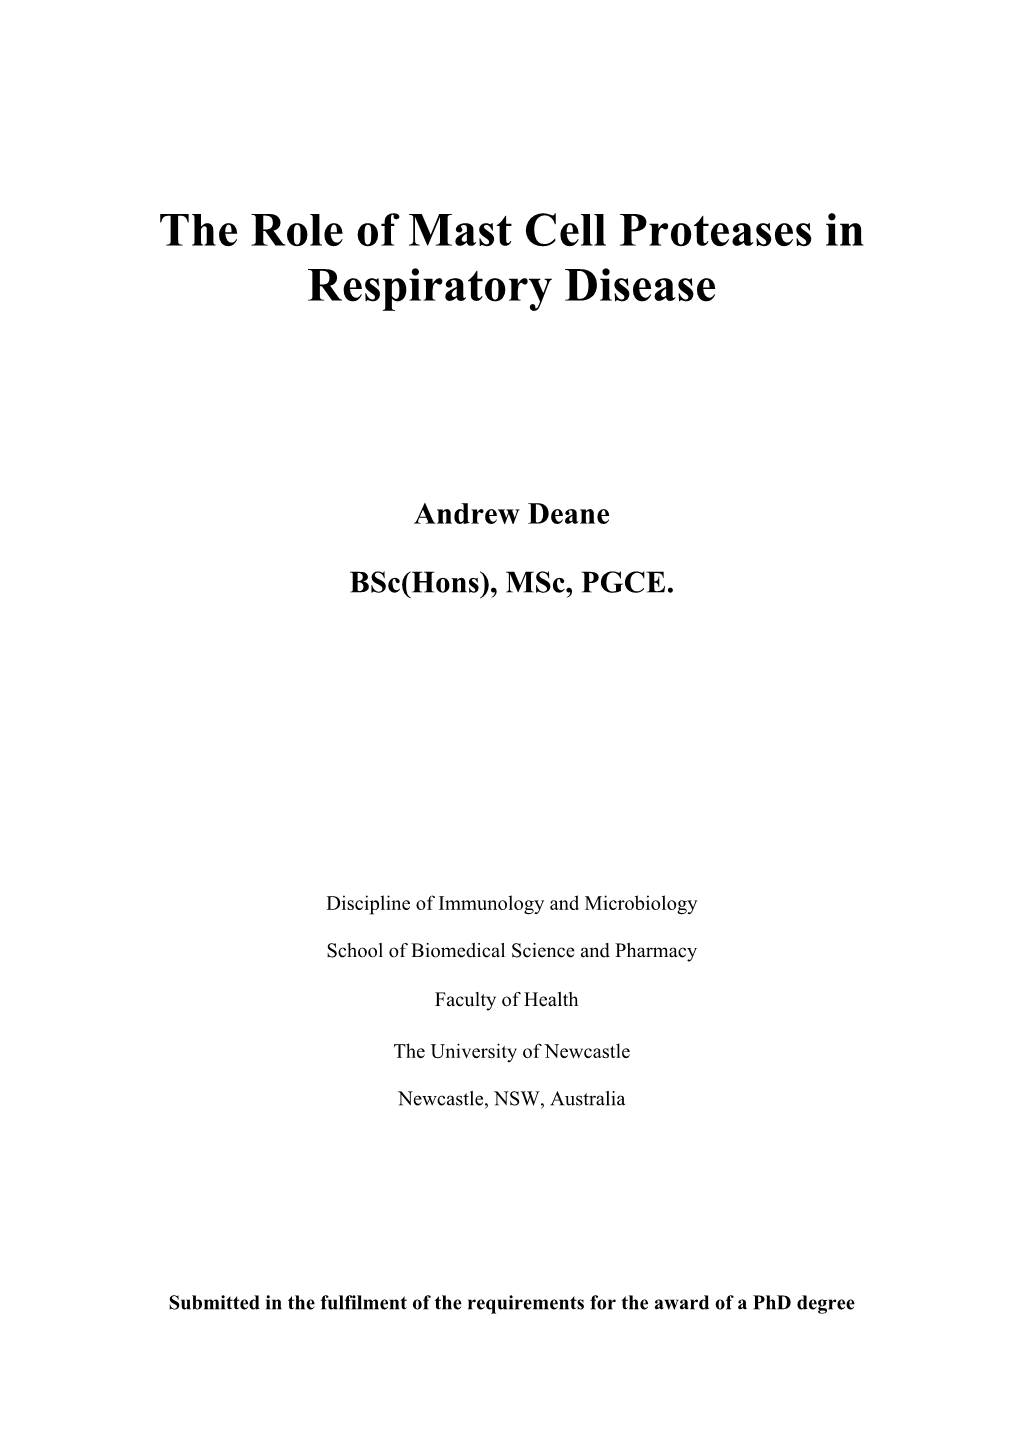 The Role of Mast Cell Proteases in Respiratory Disease